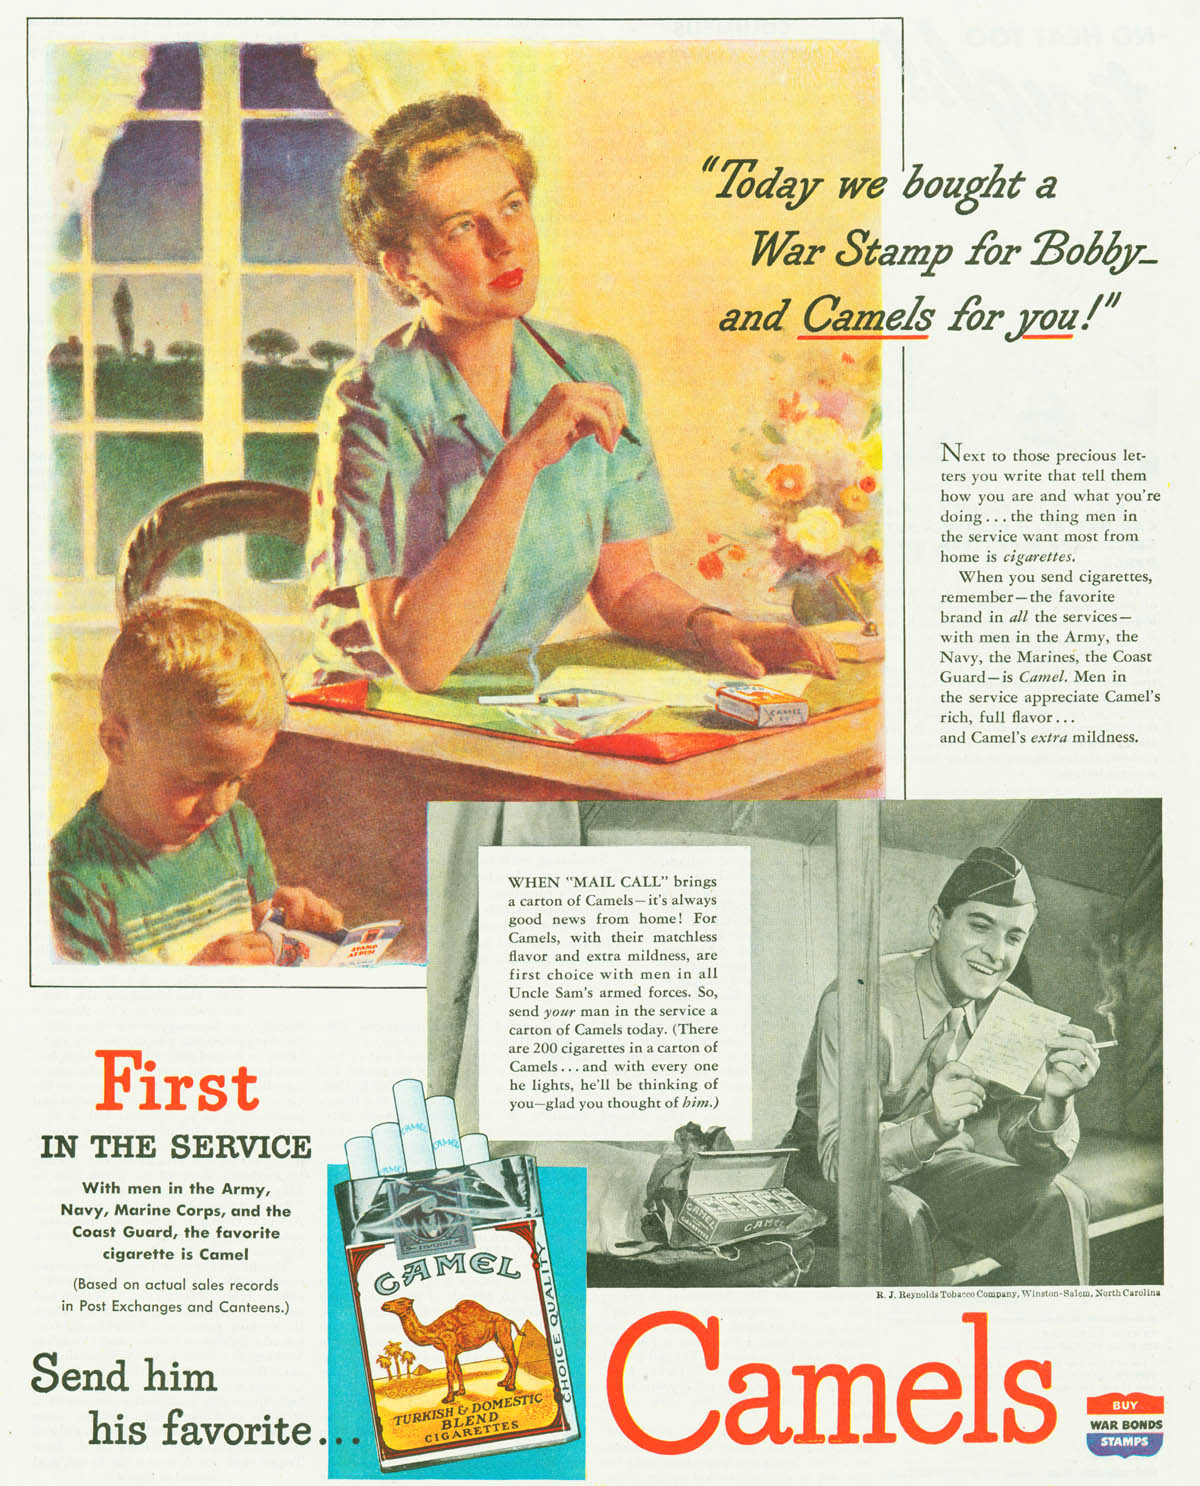 This WWII ad shows a woman sending her soldier husband a carton of cigarettes, and urges others to do the same. In an echo of the claim that doctors prefer the brand, it claims that men in the military prefer it, too. A mention of War Stamps associates the brand still more closely to war patriotism.